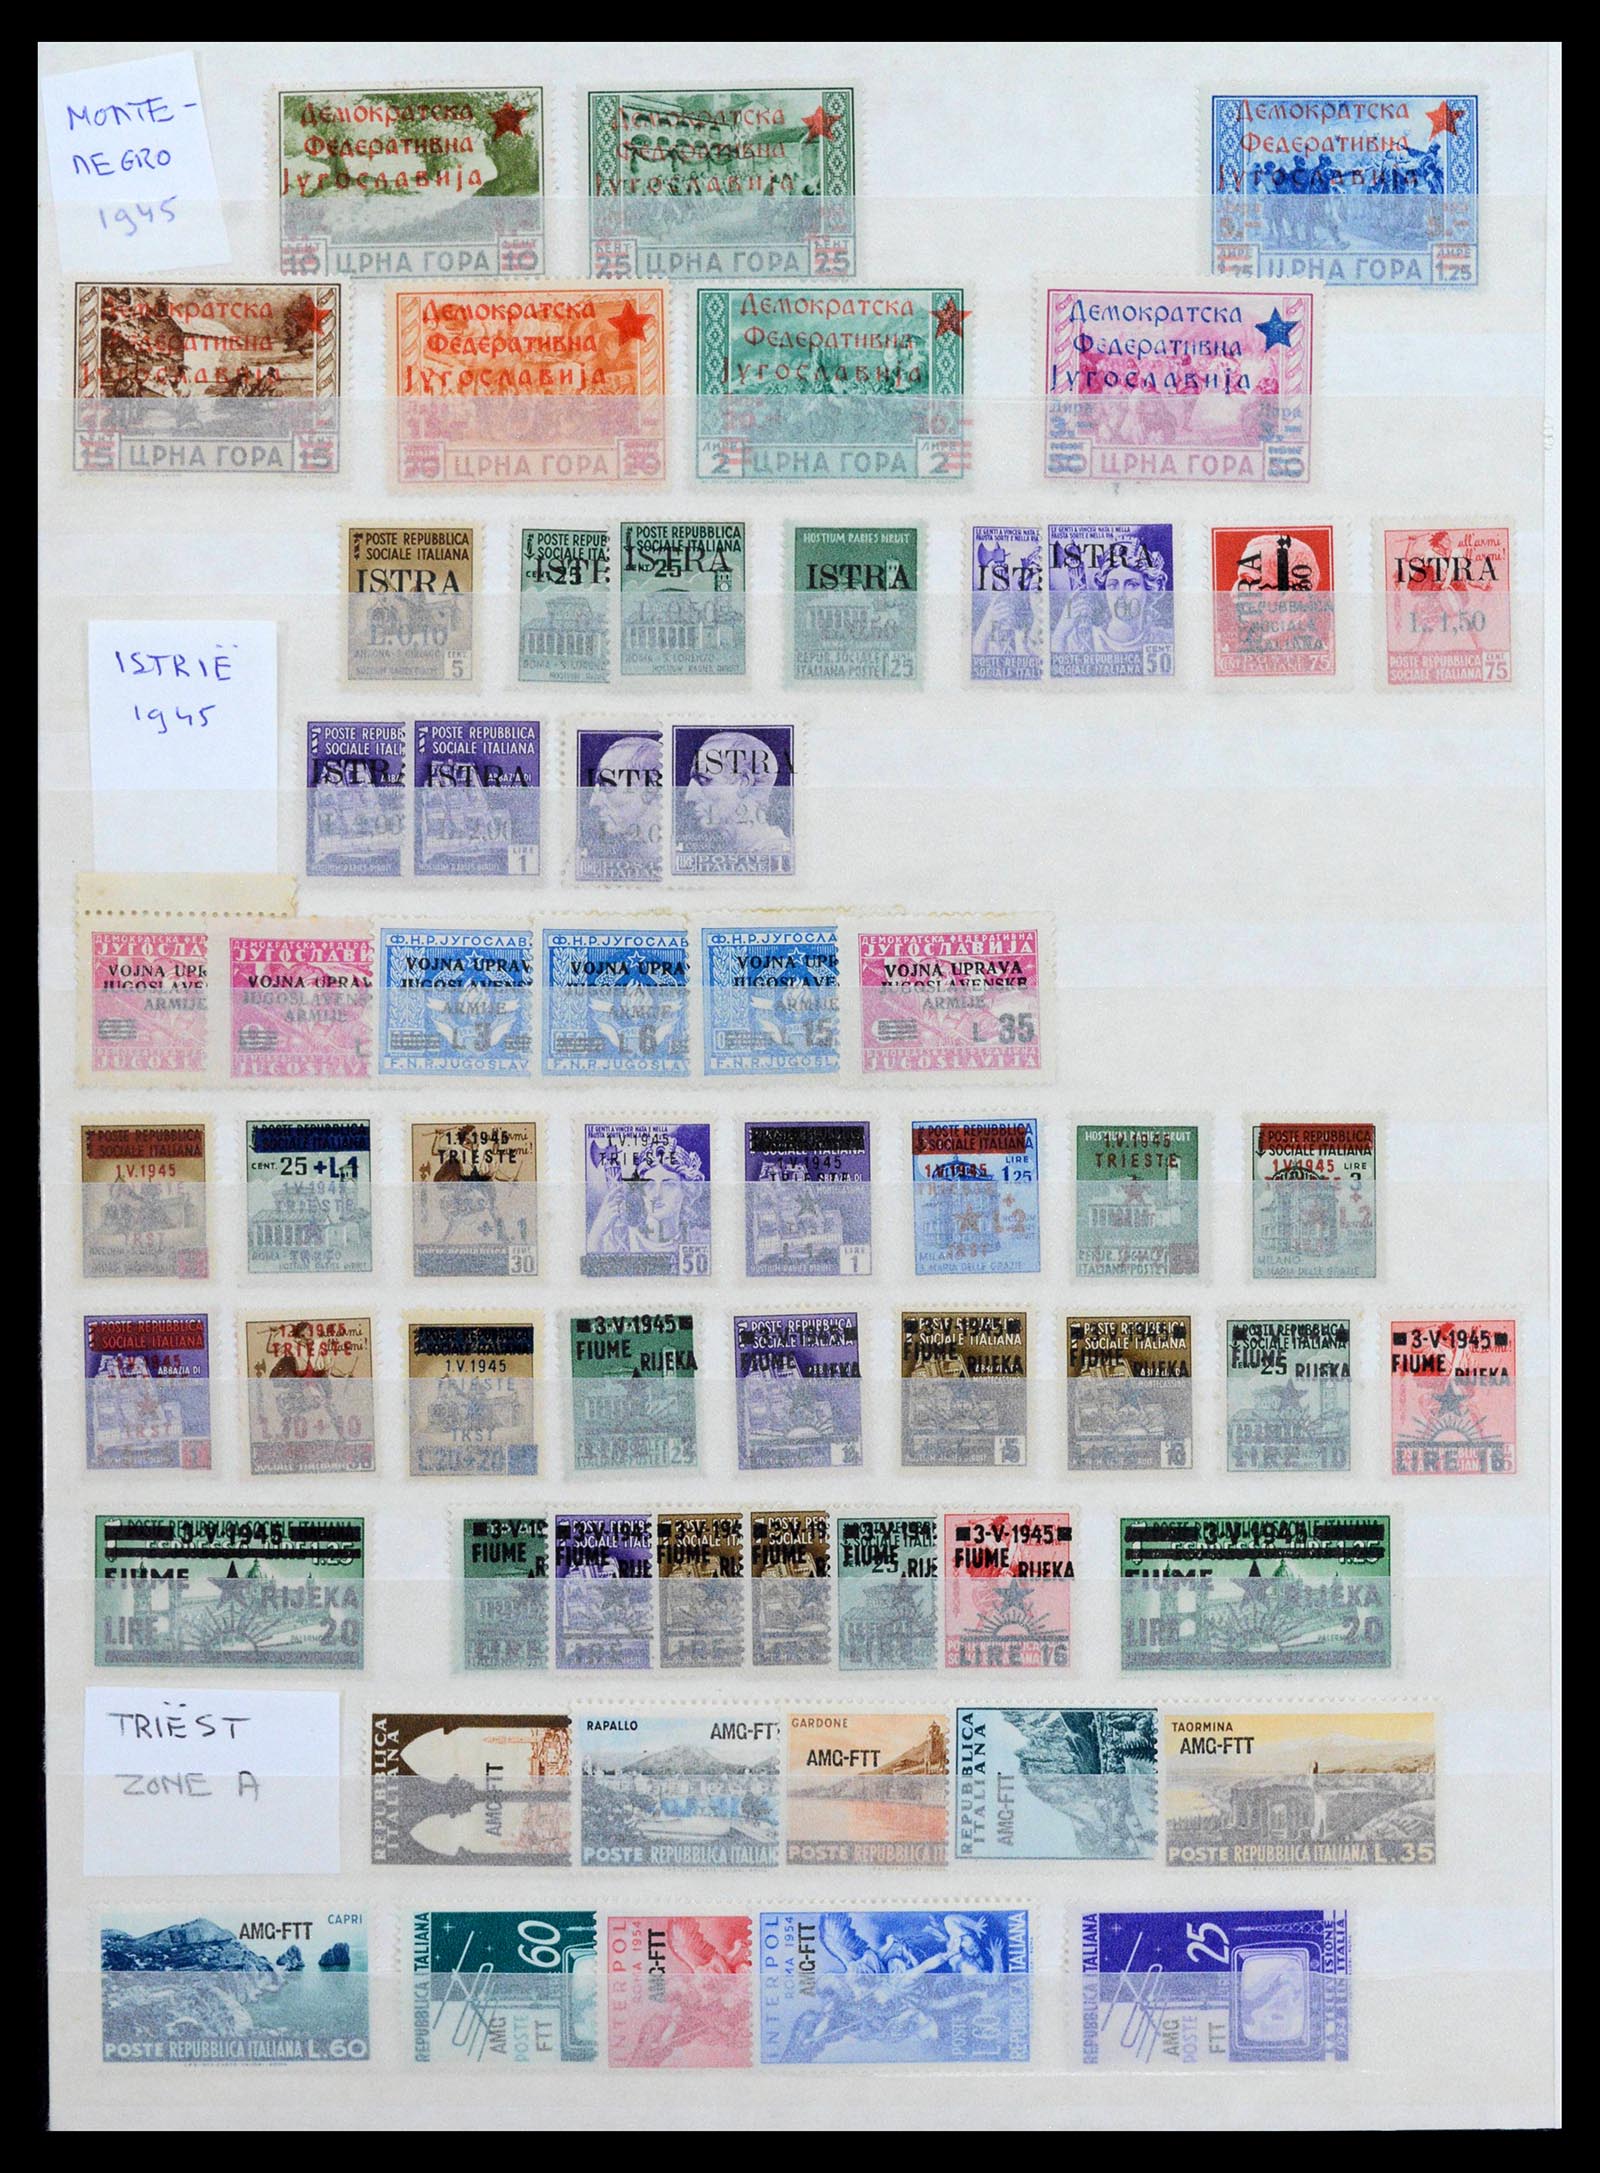 39044 0016 - Stamp collection 39044 European countries 1900-1945.